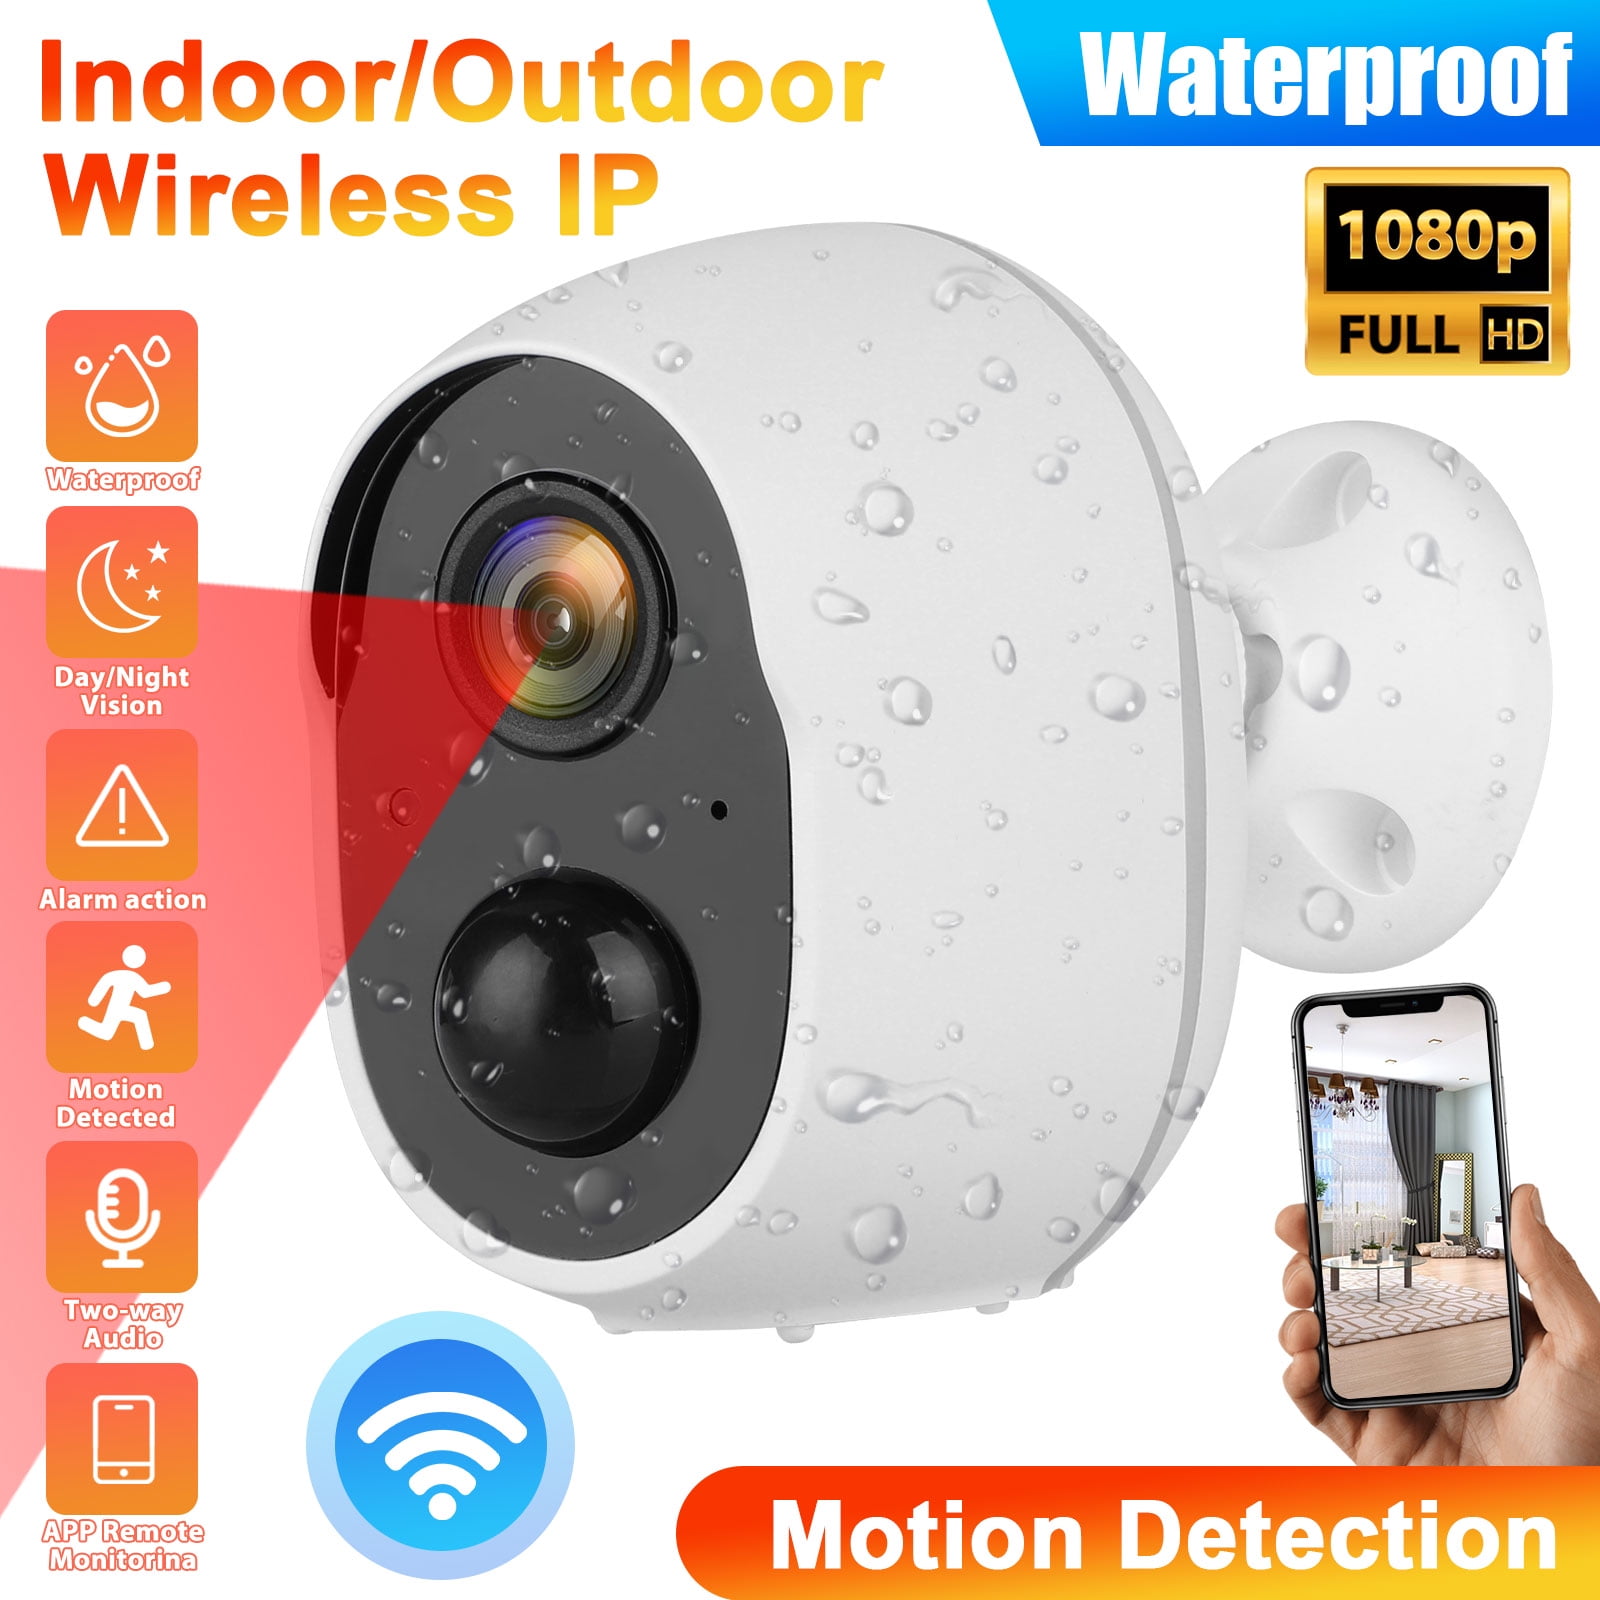 Enow-YL Waterproof Outdoor Home Security Camera 1080P Video Night Vision with PIR Motion Sensor 2 Way Audio Wireless Rechargeable Battery Powered WiFi Camera Upgraded 32GB Card Pre-Installed 